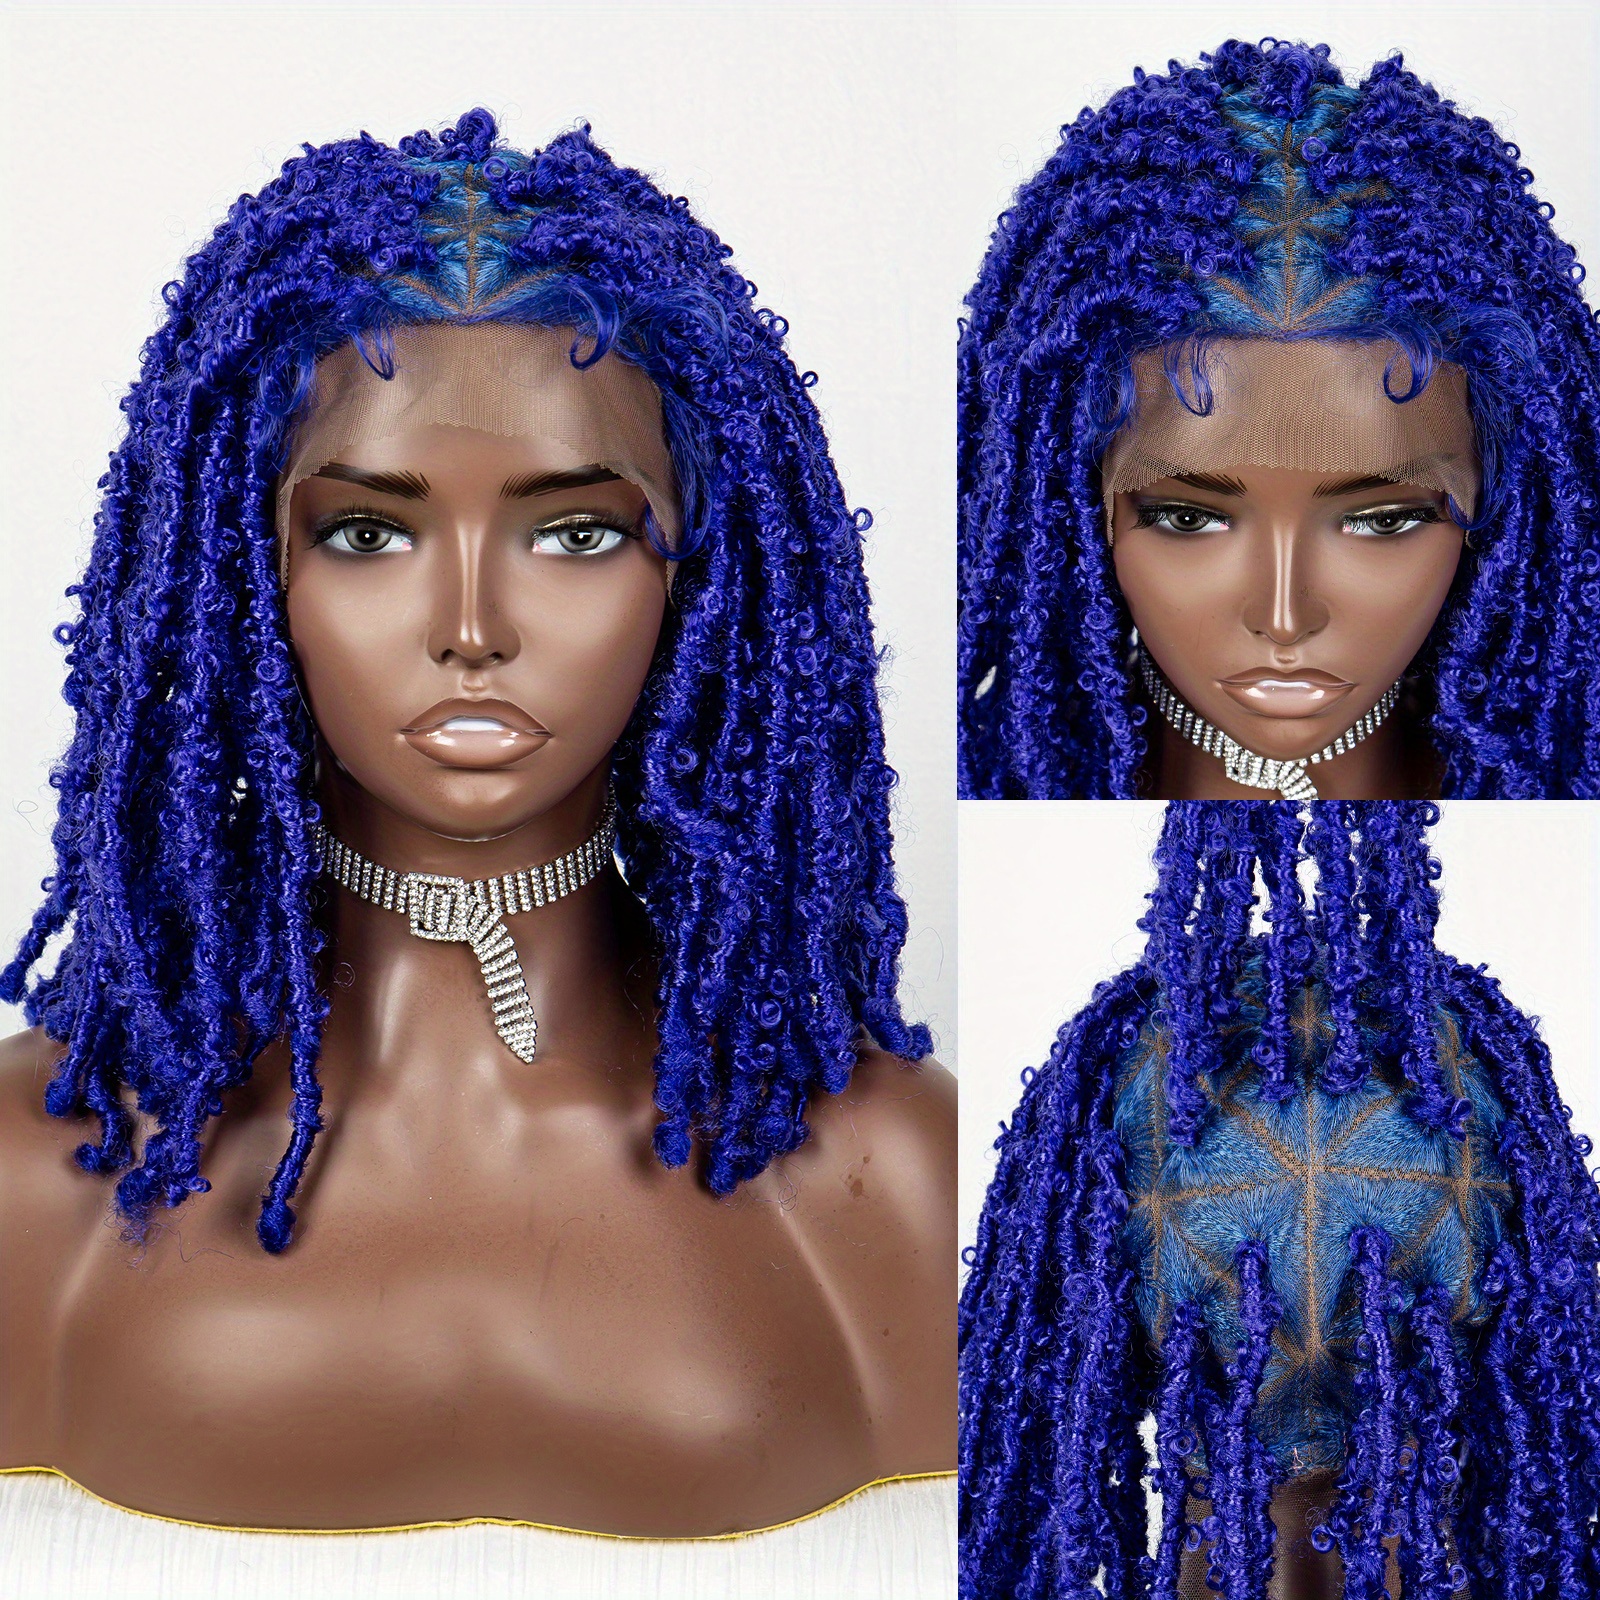  Blue Braided Wigs Lace Front Wigs for Black Women